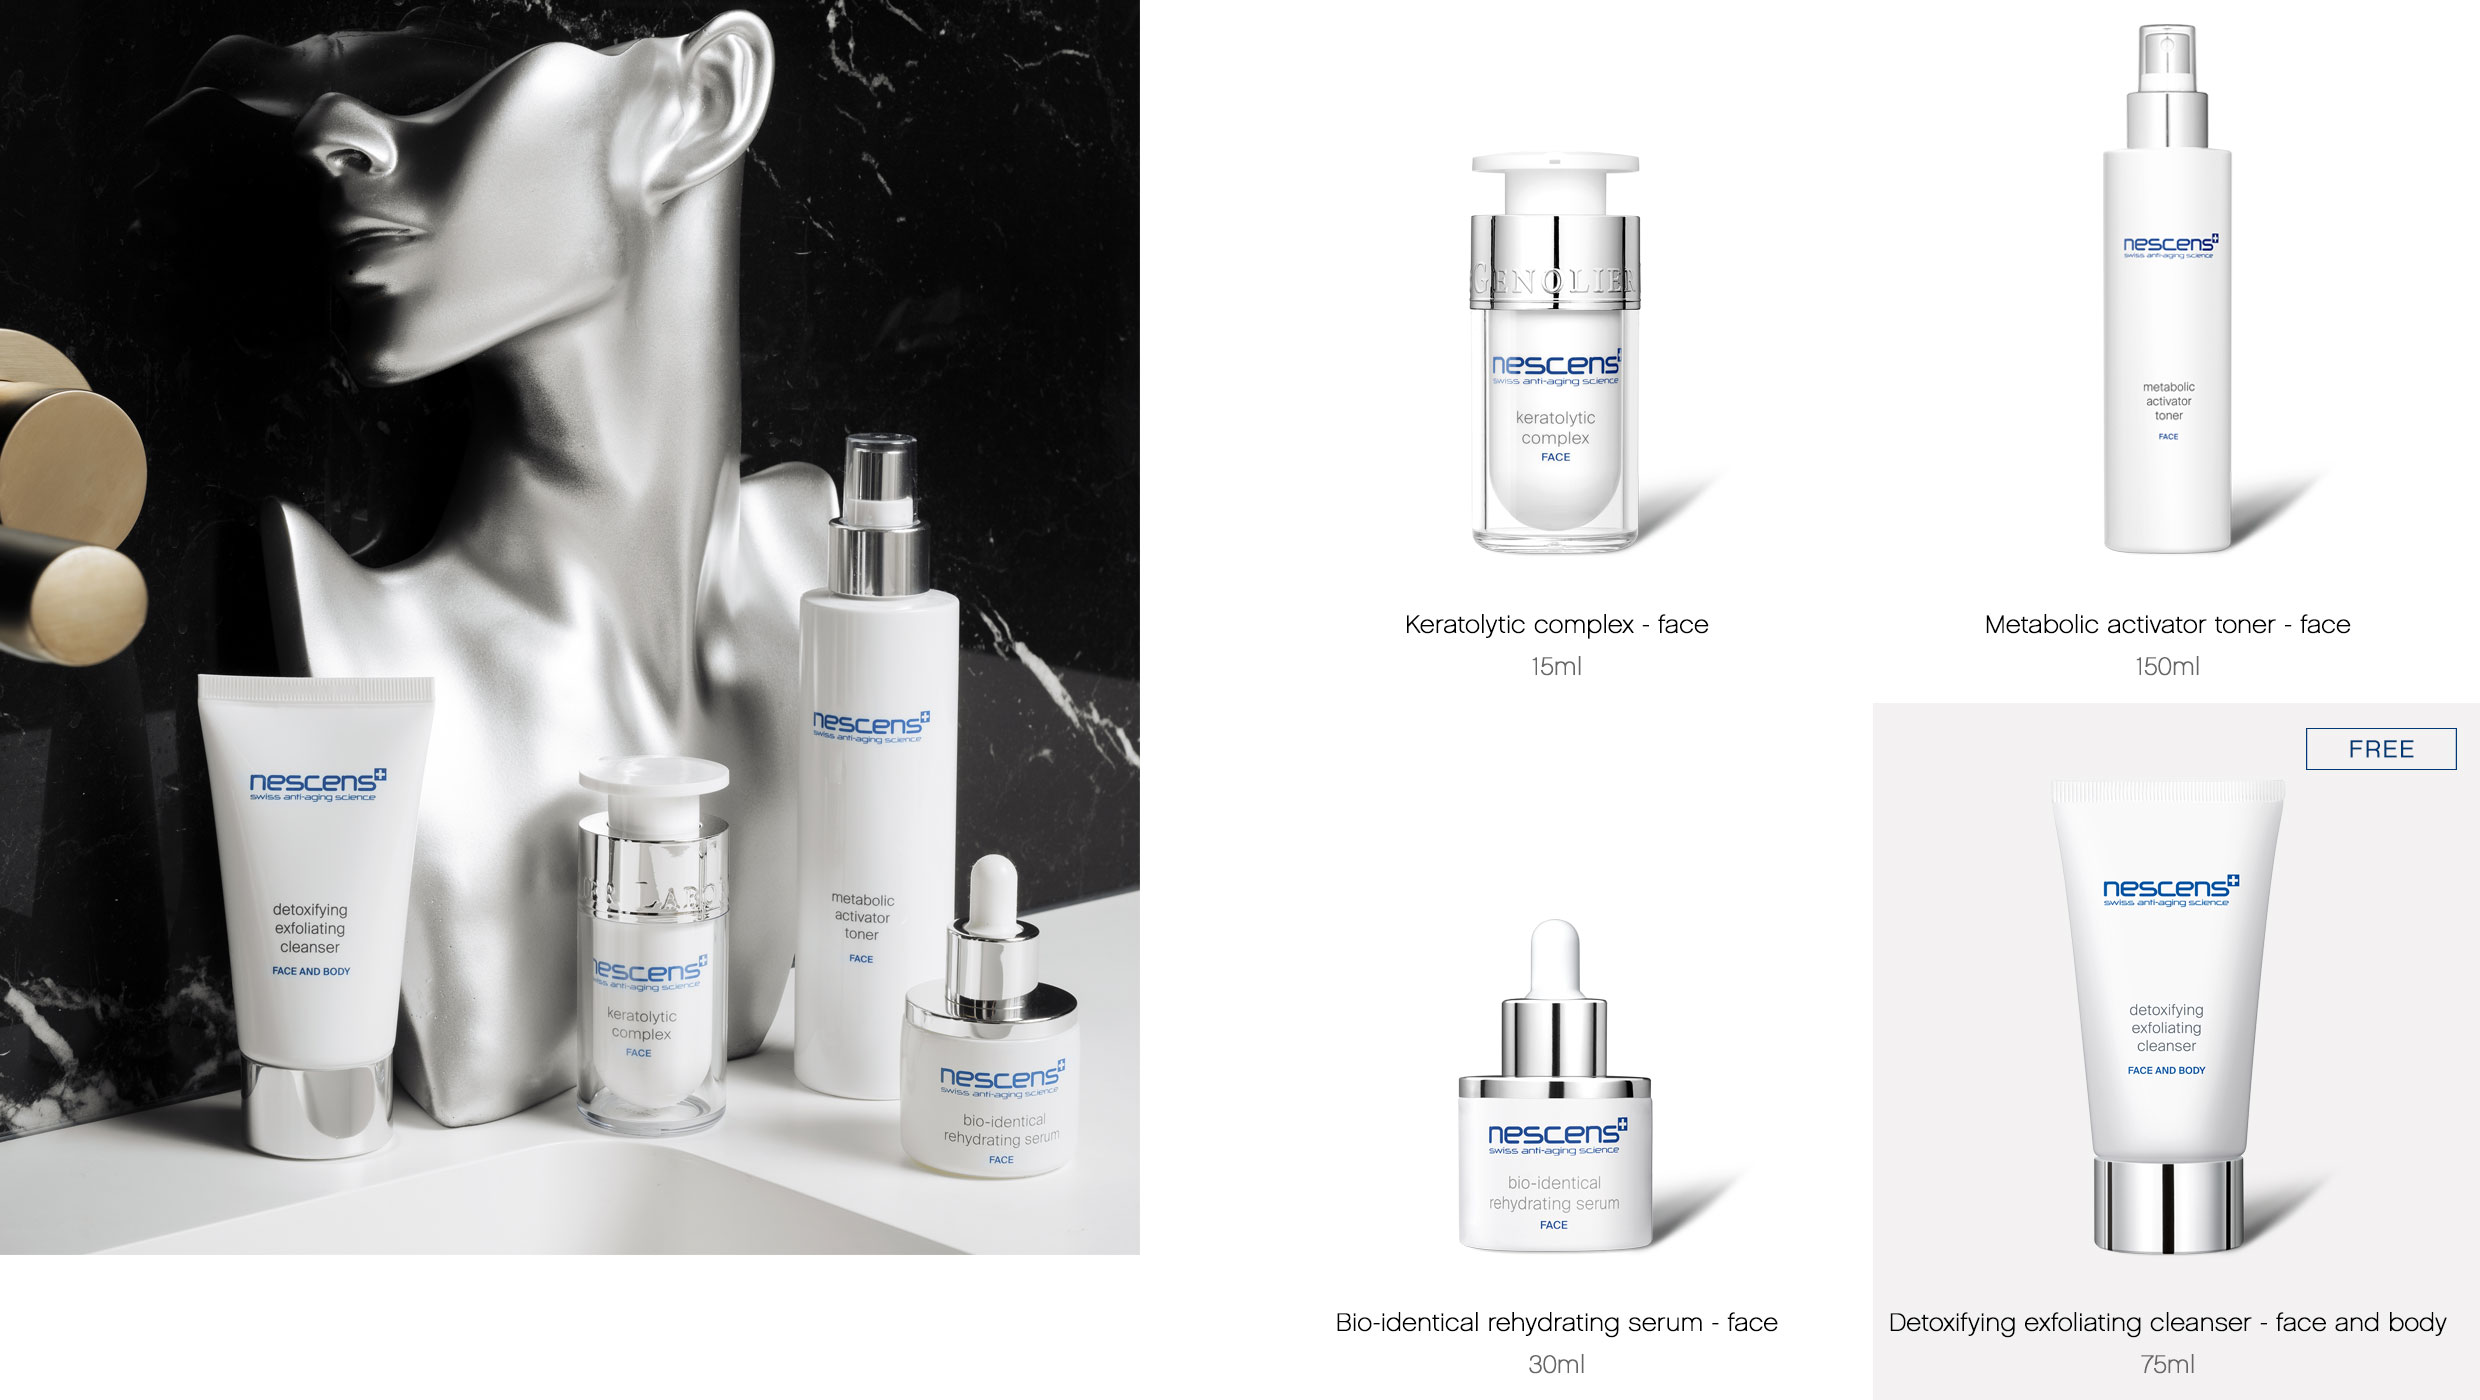 luminessence anti aging kód postai chene bougeries suisse anti aging